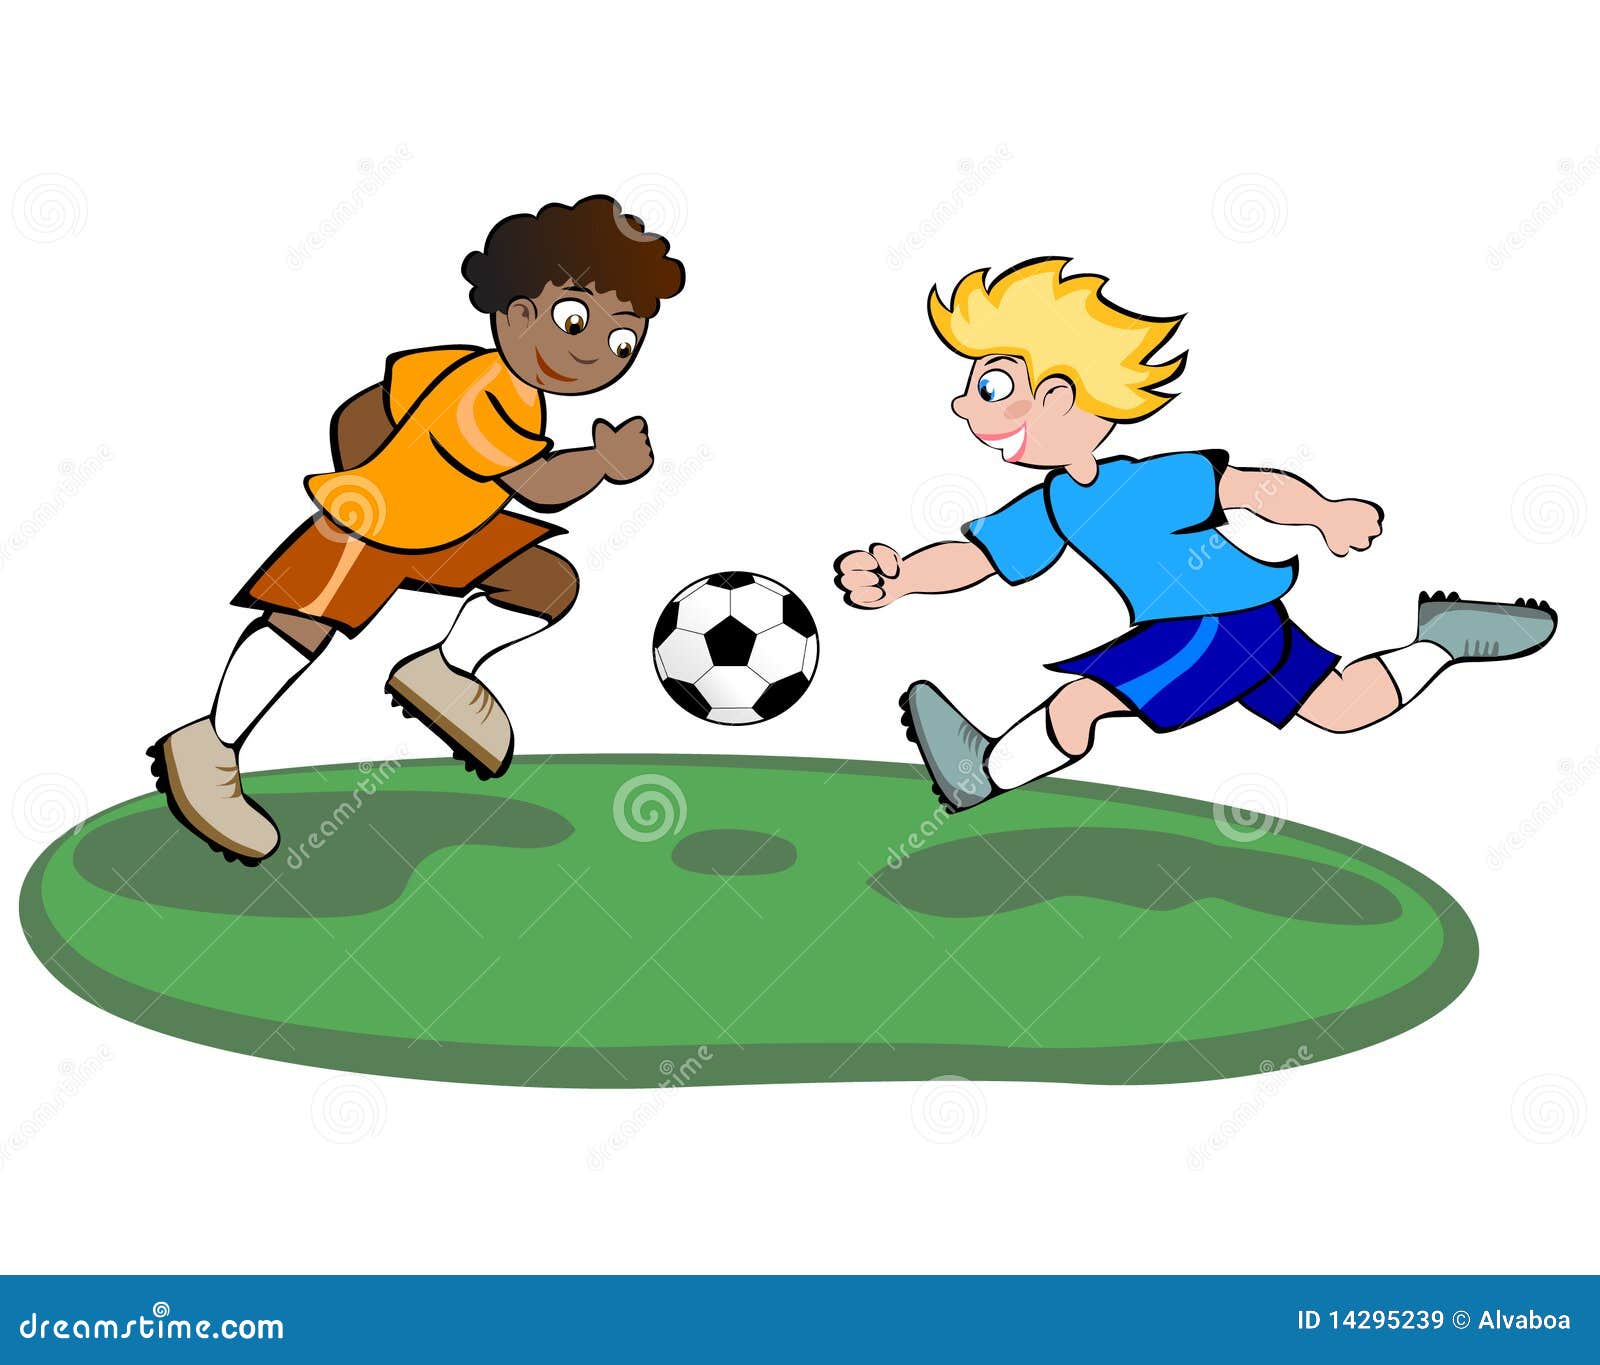 football game clipart free - photo #11